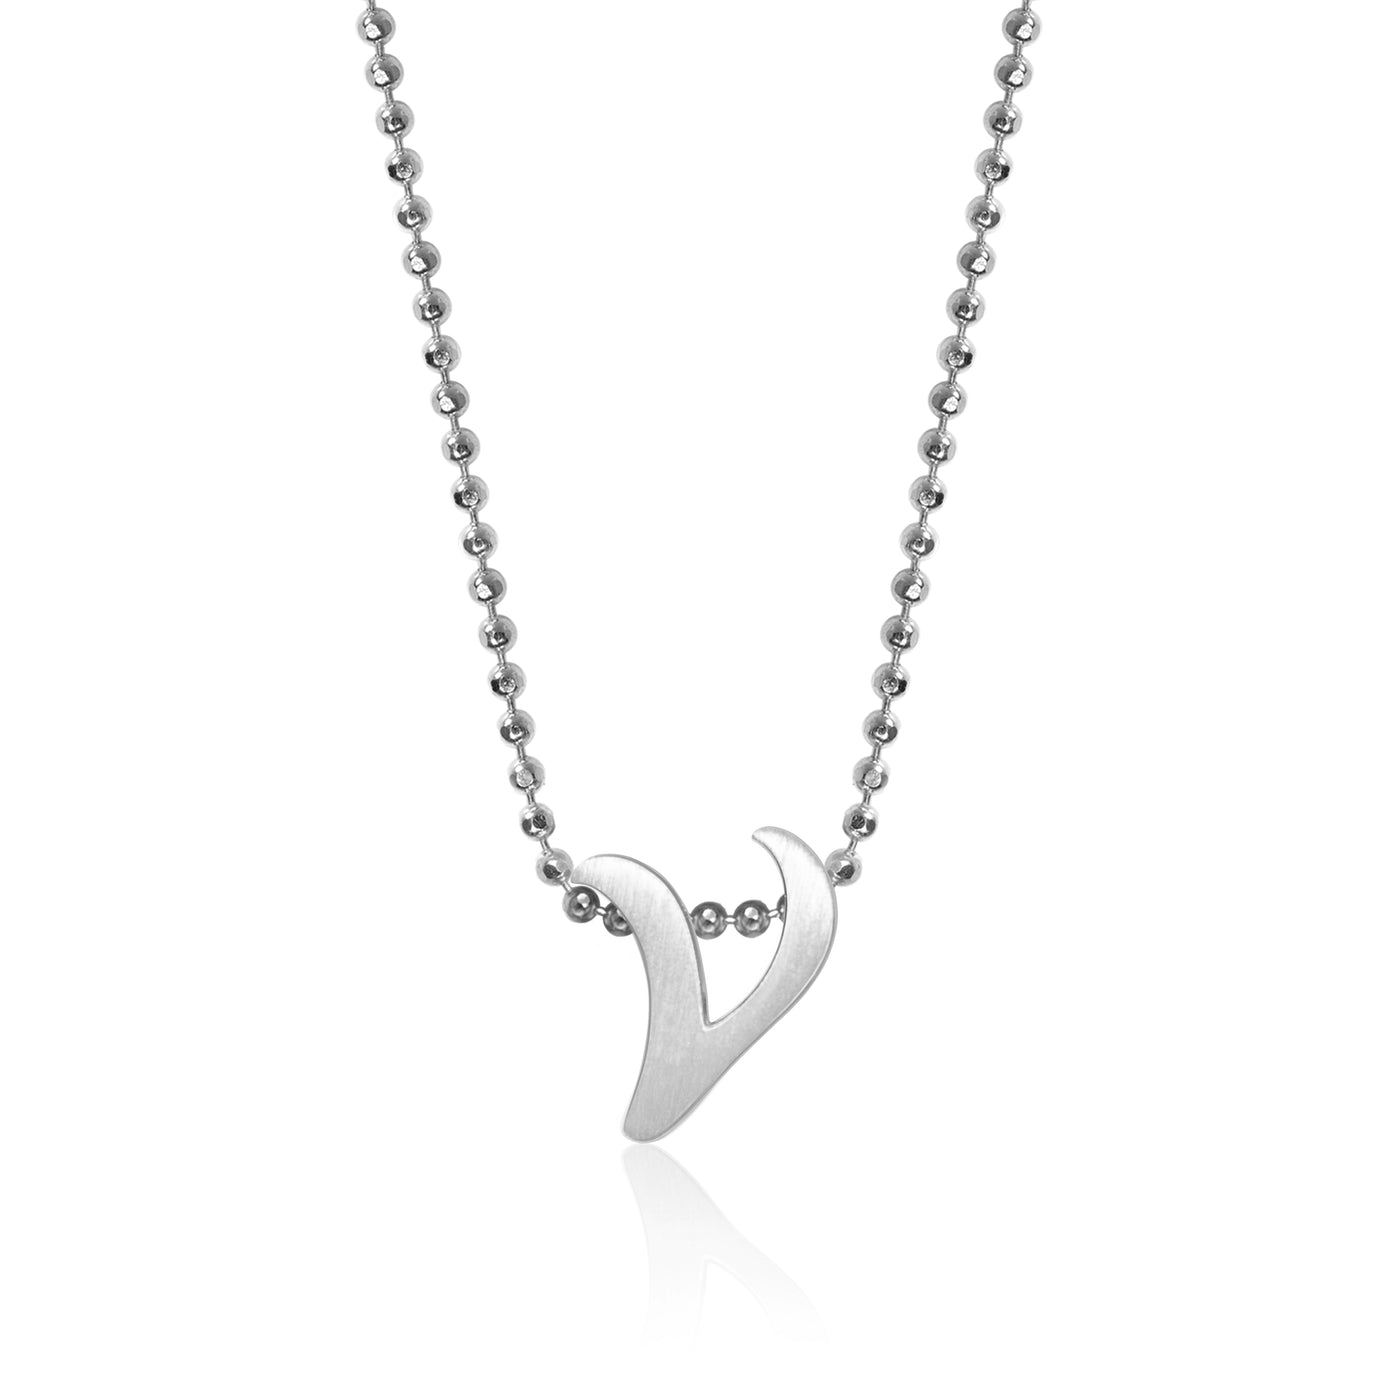 Alex Woo Autograph Letter v Scripted Initial Charm Necklace